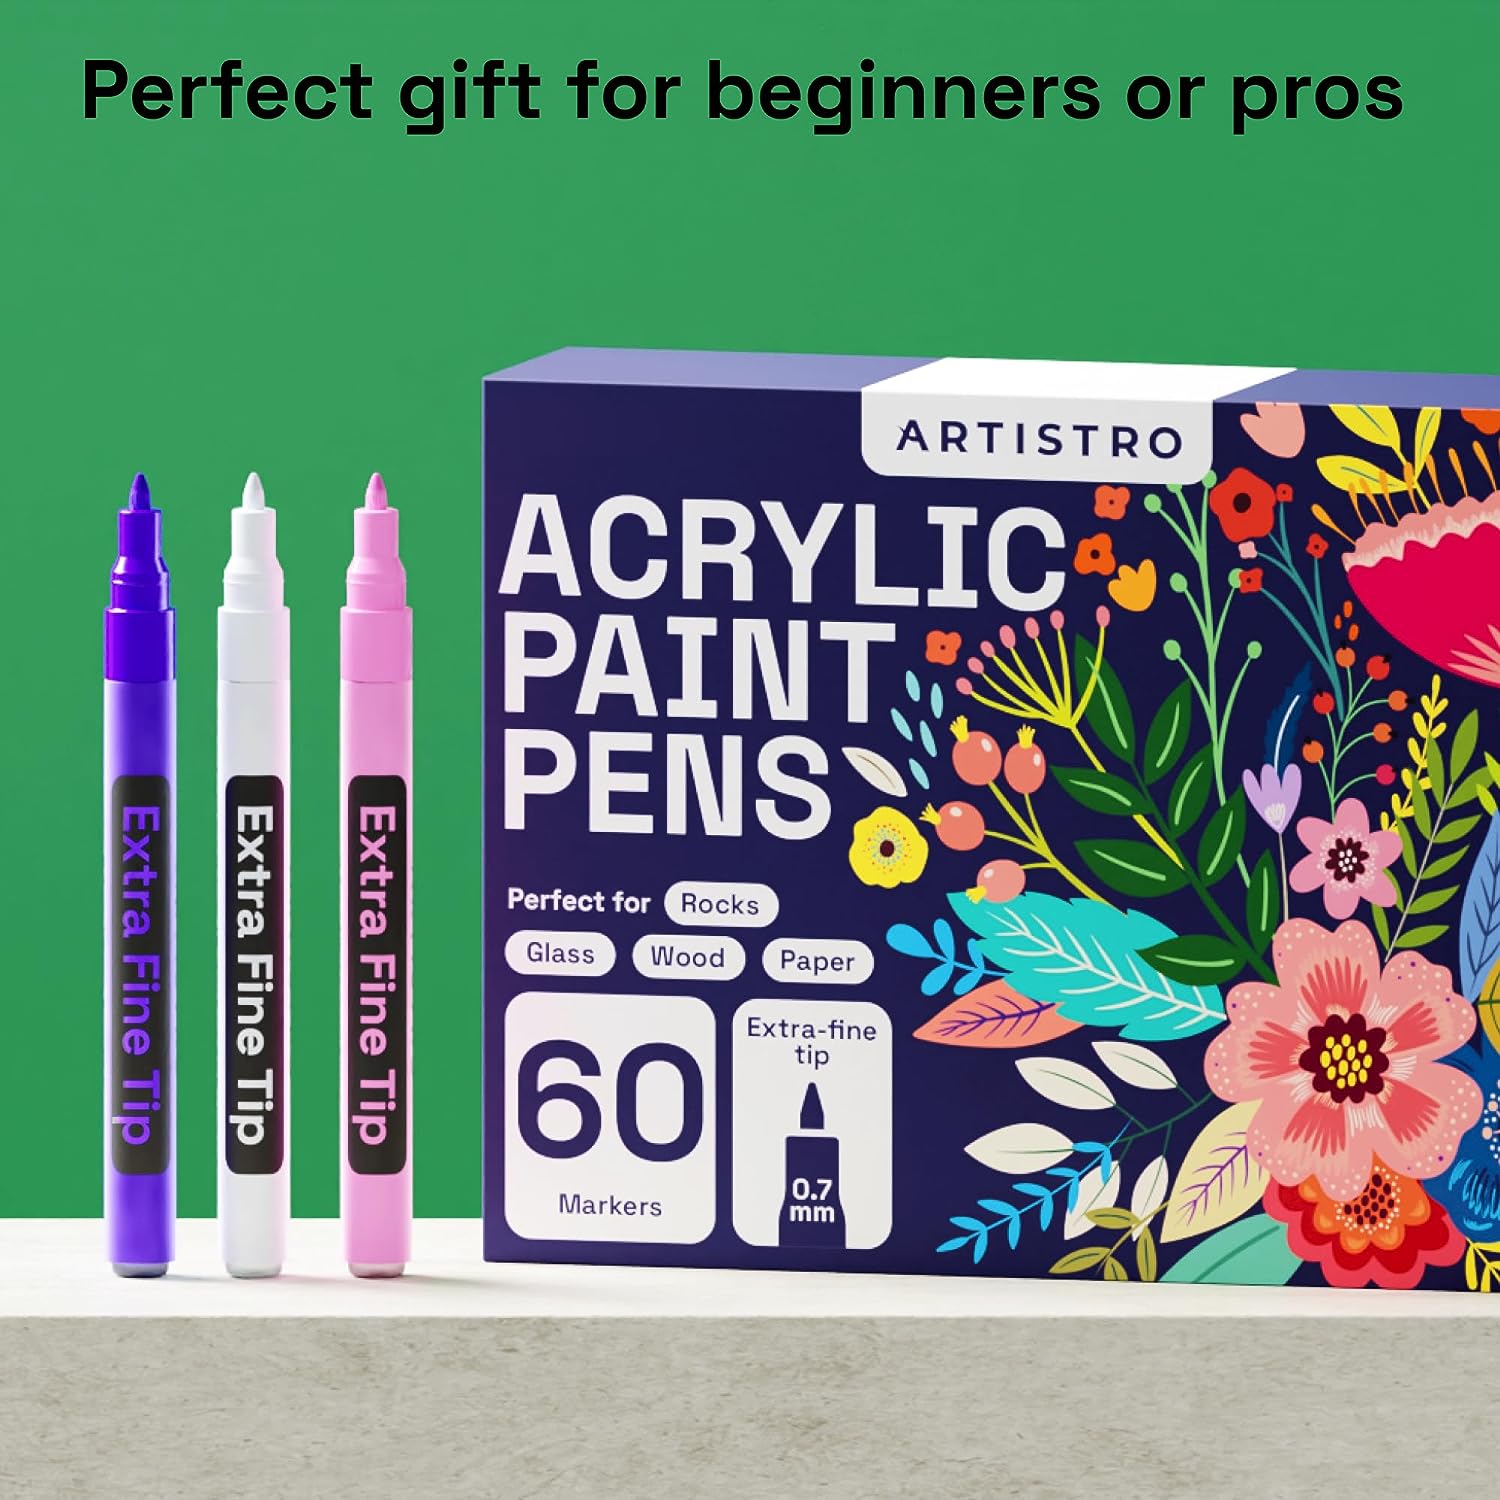 60 acrylic paint pens perfect gift for beginners or pros